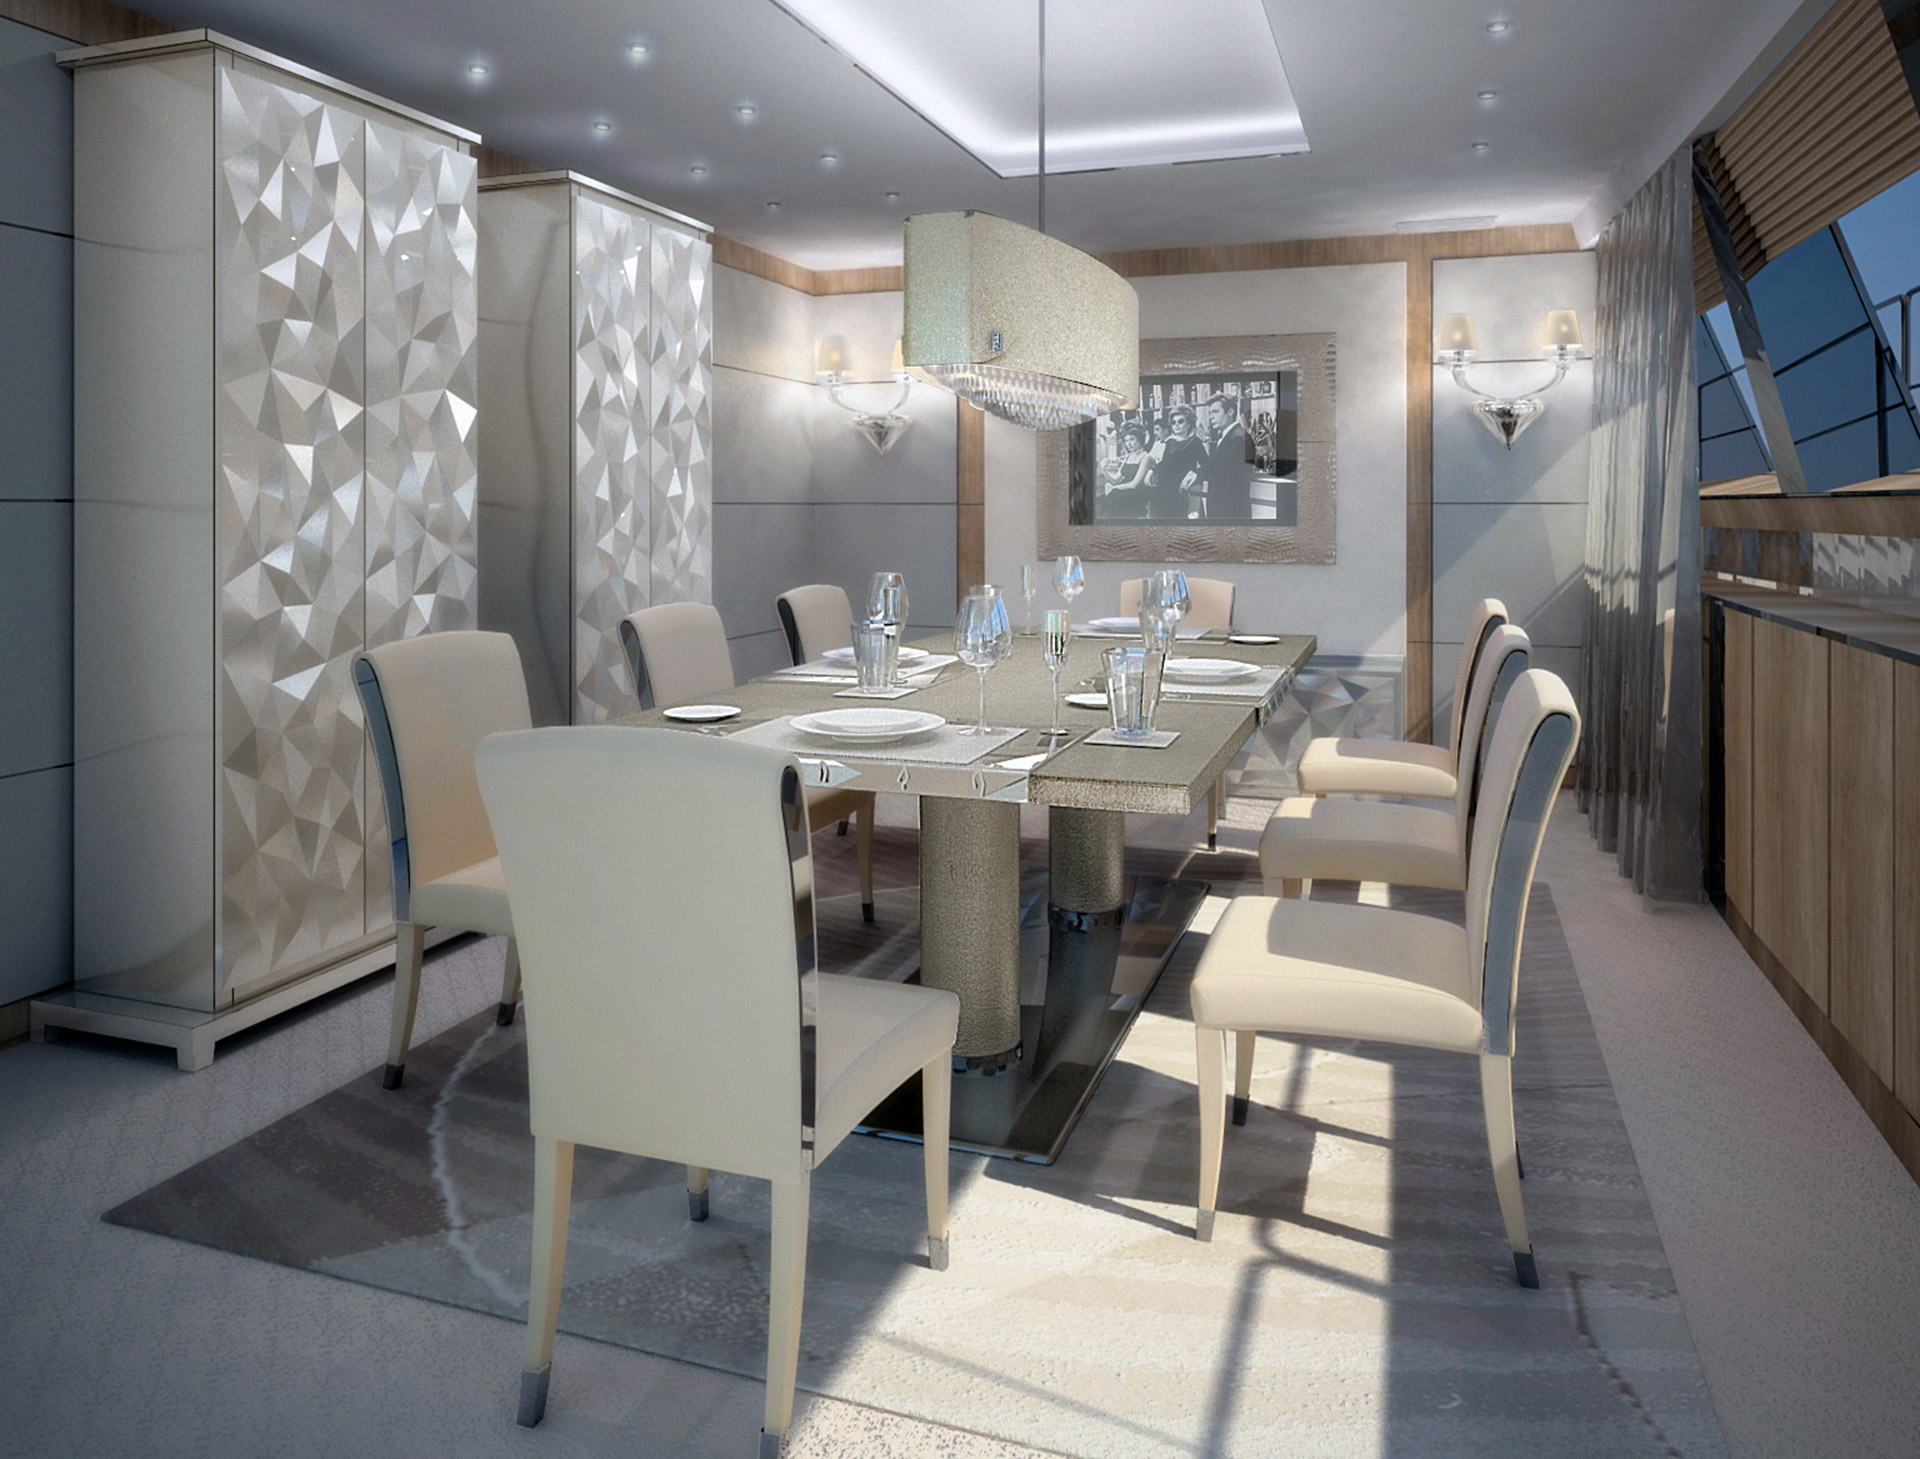 Dining Room for a sailing boat by Borella Art Design